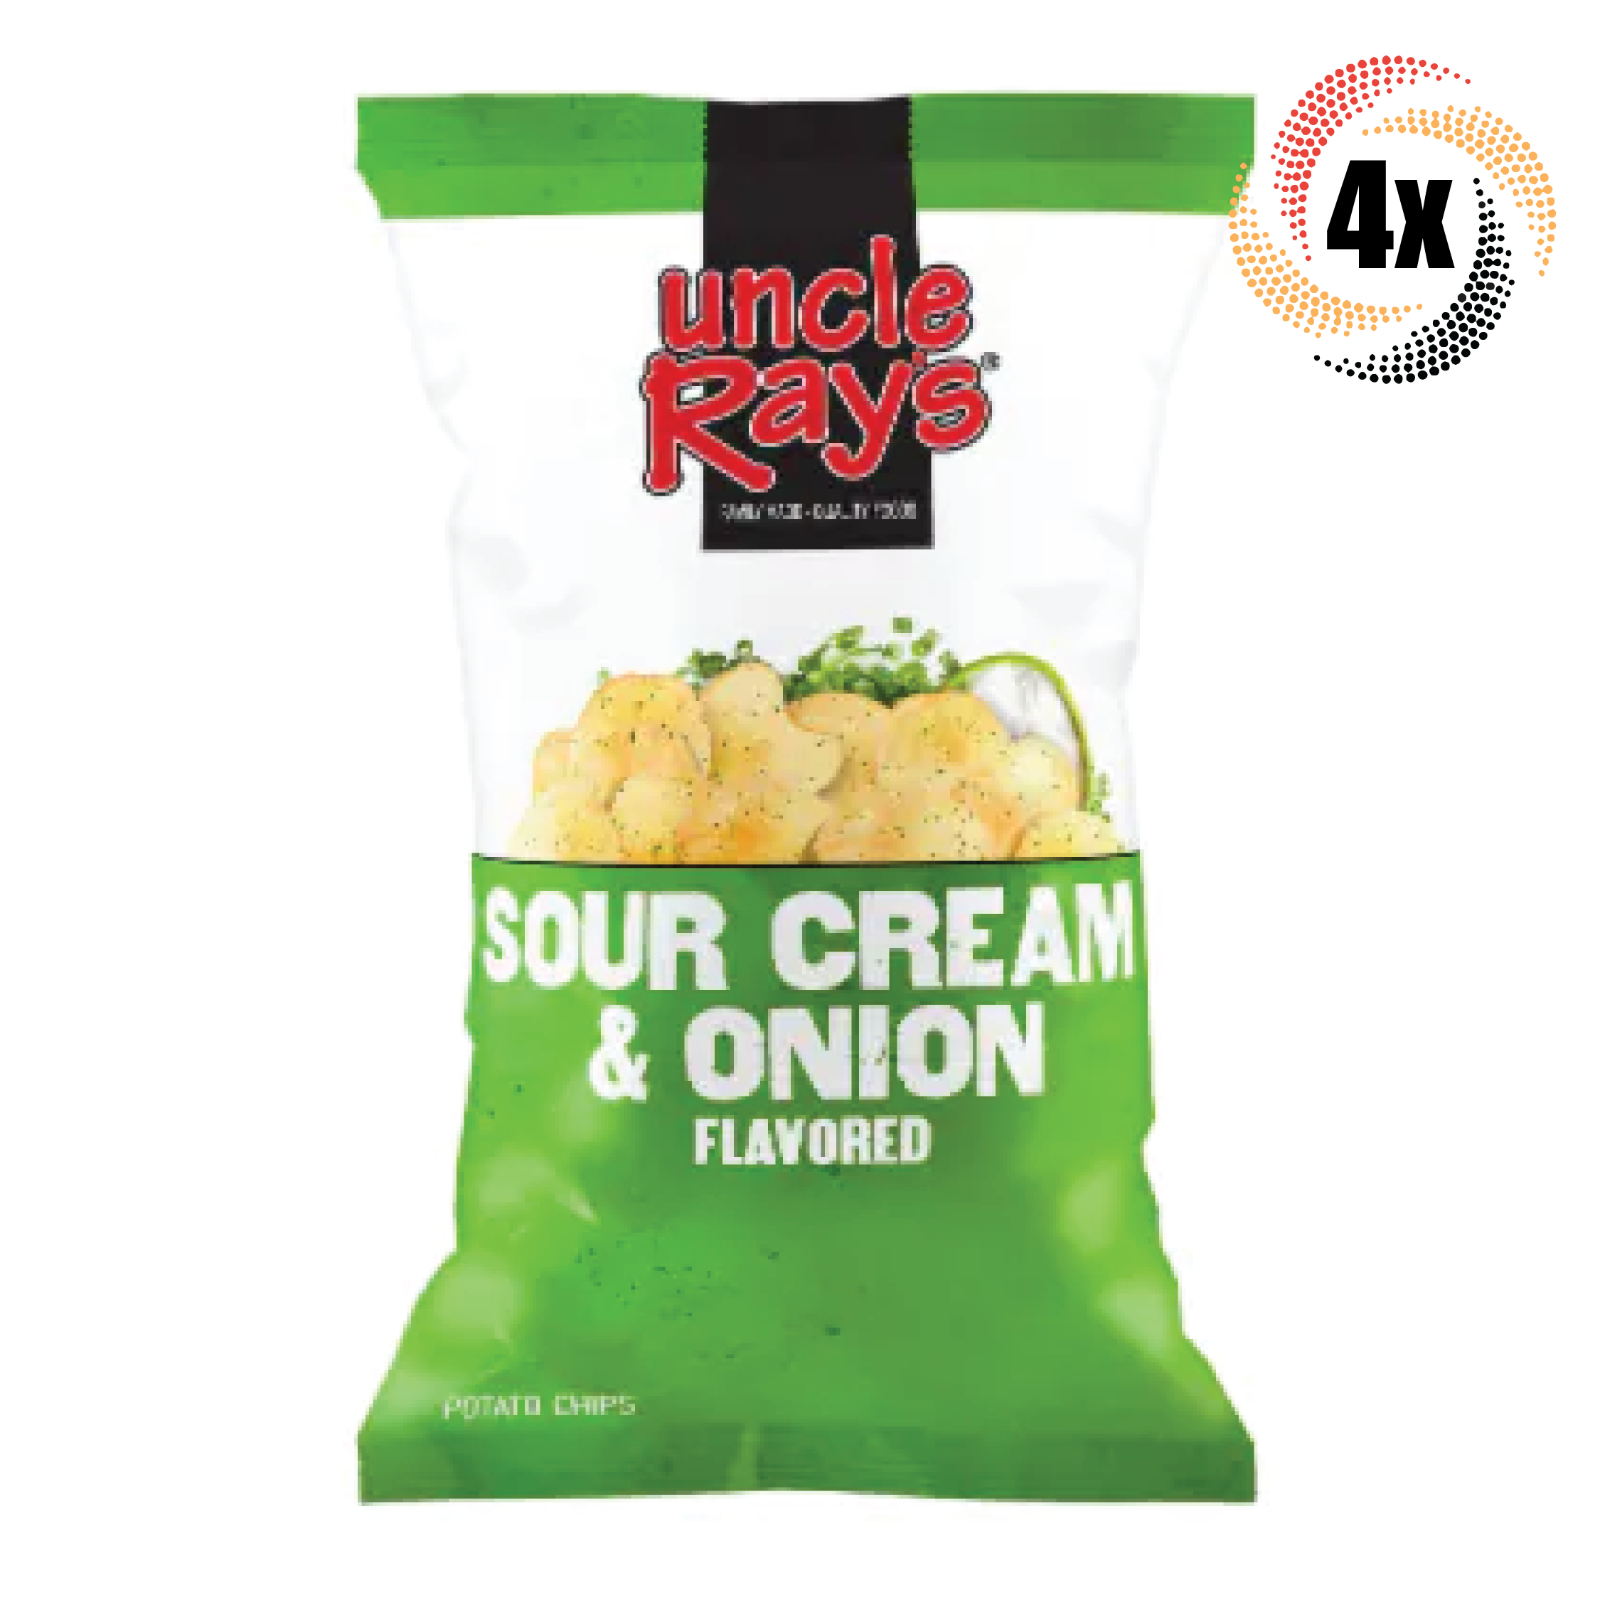 4x Bags Uncle Ray's Sour Cream & Onion Flavor 4.5oz | Official MLB Chips - $18.38